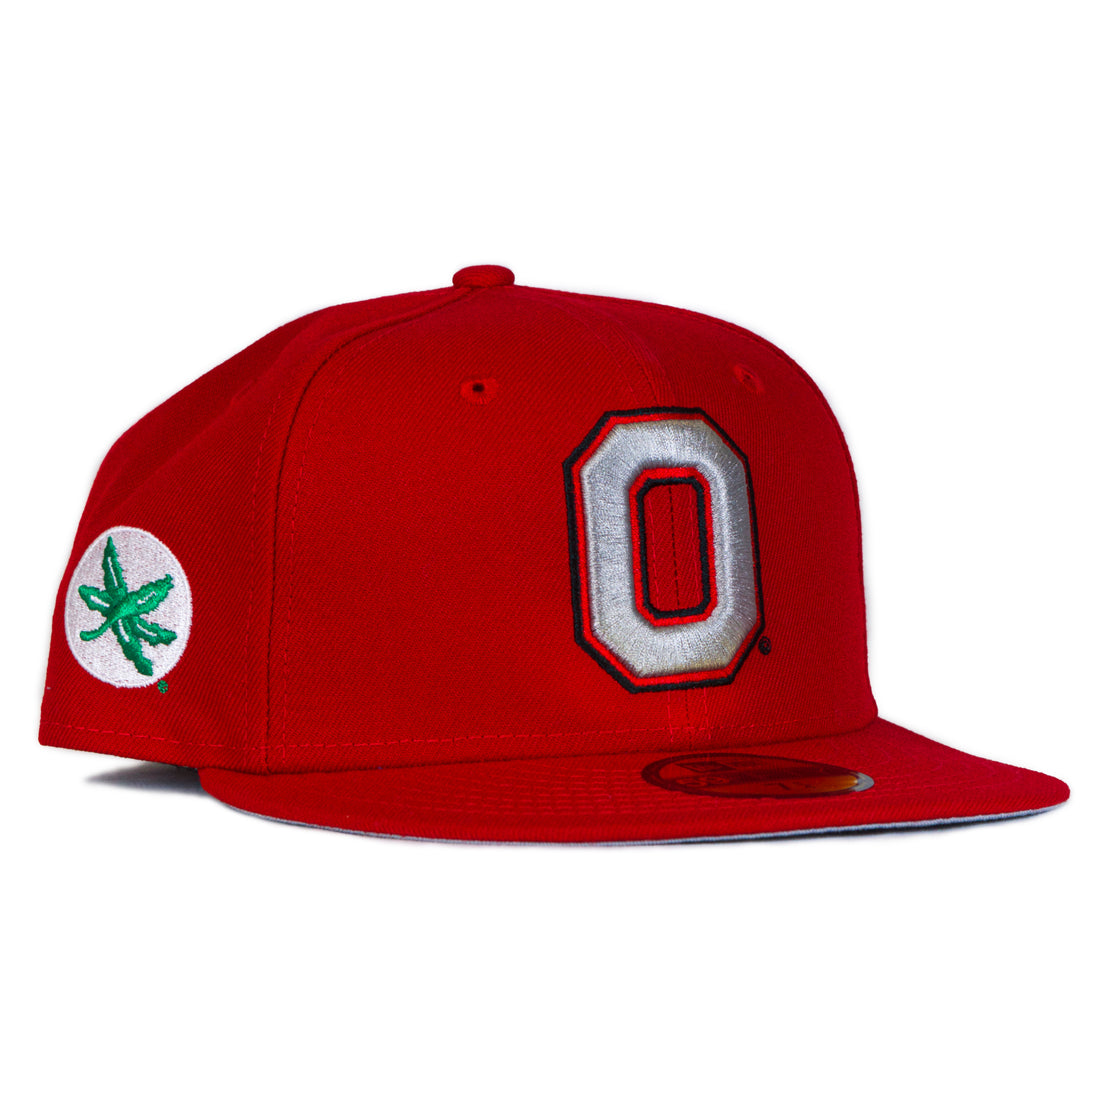 New Era Ohio State Buckeyes 59FIFTY Fitted - Red